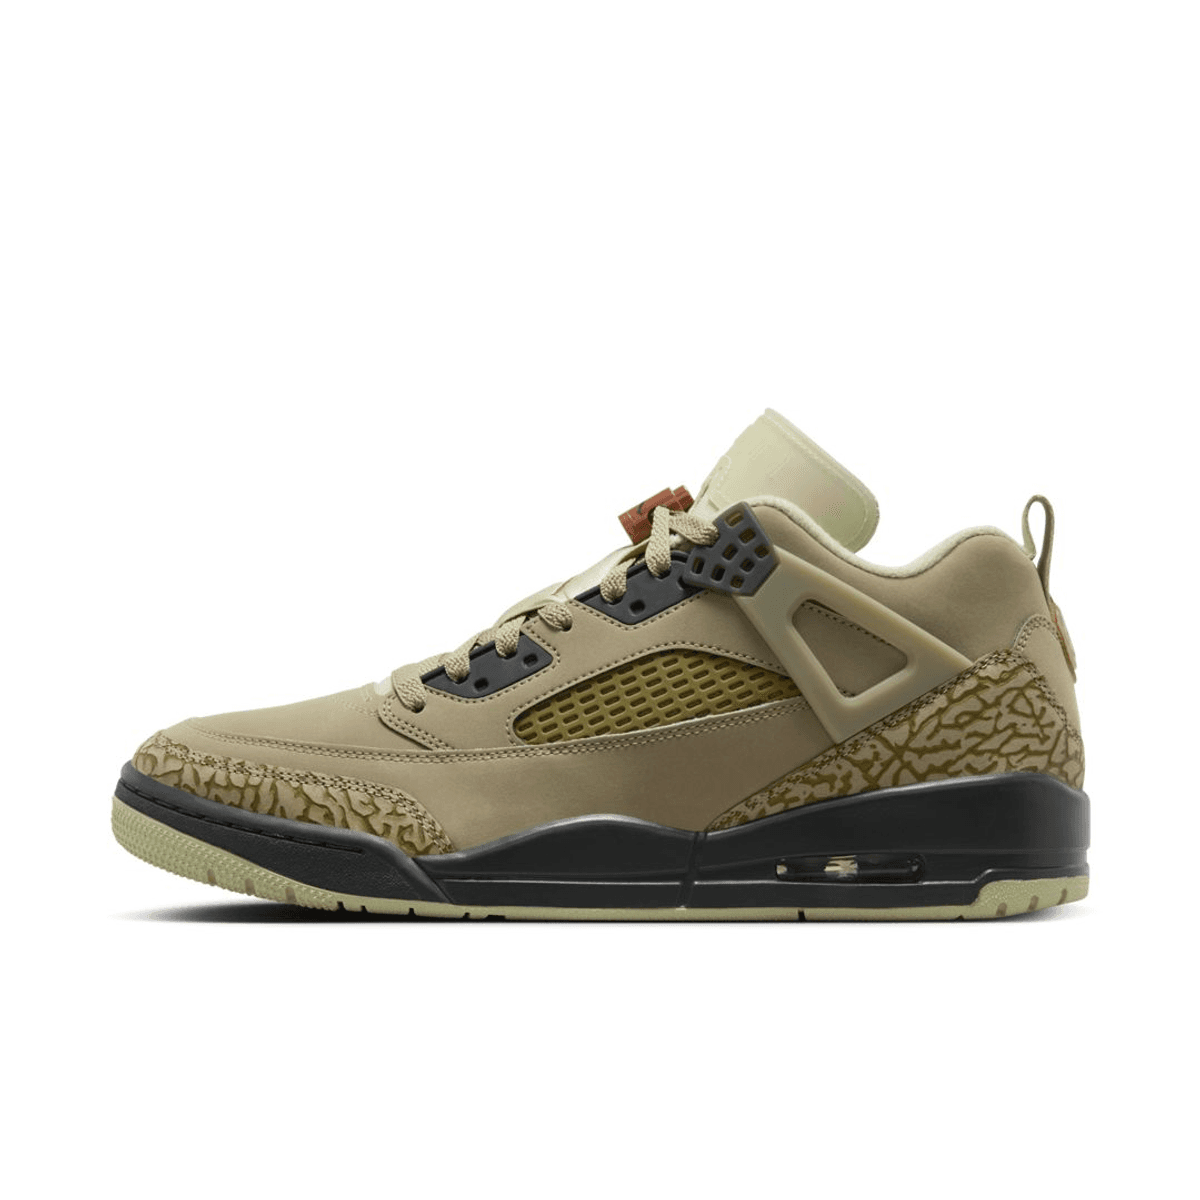 The Jordan Spizike Low “Neutral Olive” Releases Fall 2024